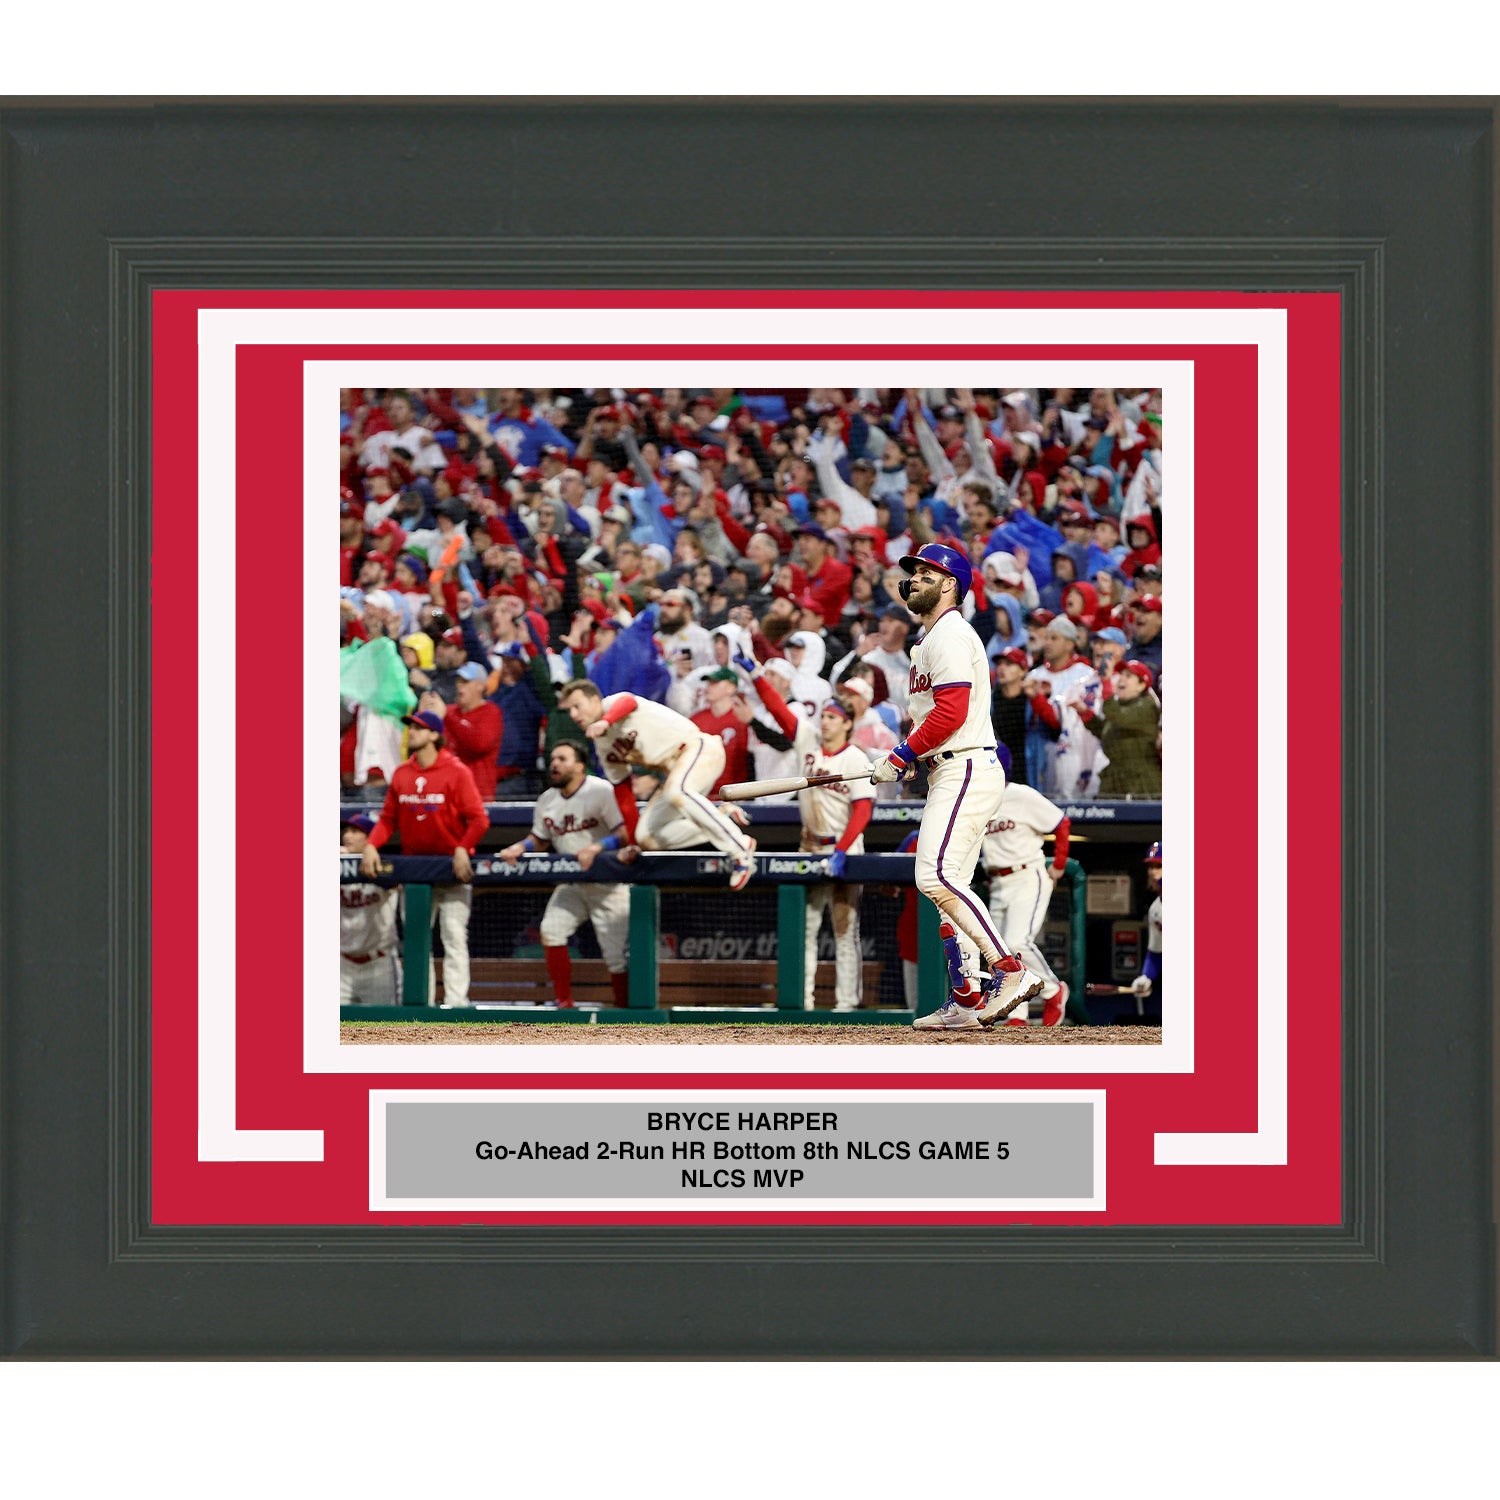 Bryce Harper Philadelphia Phillies Autographed Deluxe Framed 8 x 10 Swinging in White Jersey Horizontal Photograph